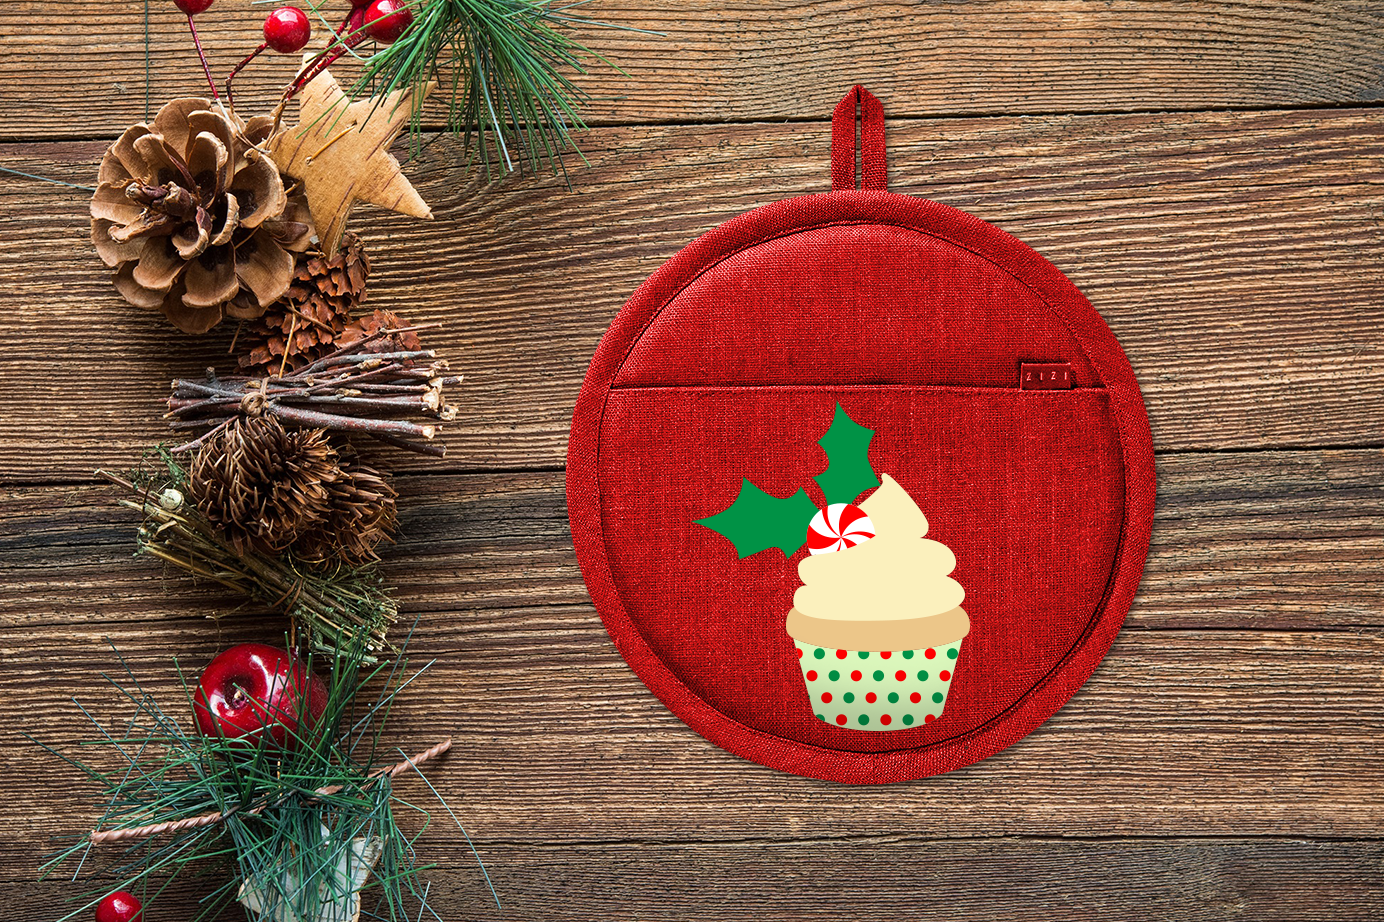 Pot holder with a cupcake design. The cupcake is decorated with holly, a peppermint, and a polkadot wrapper.